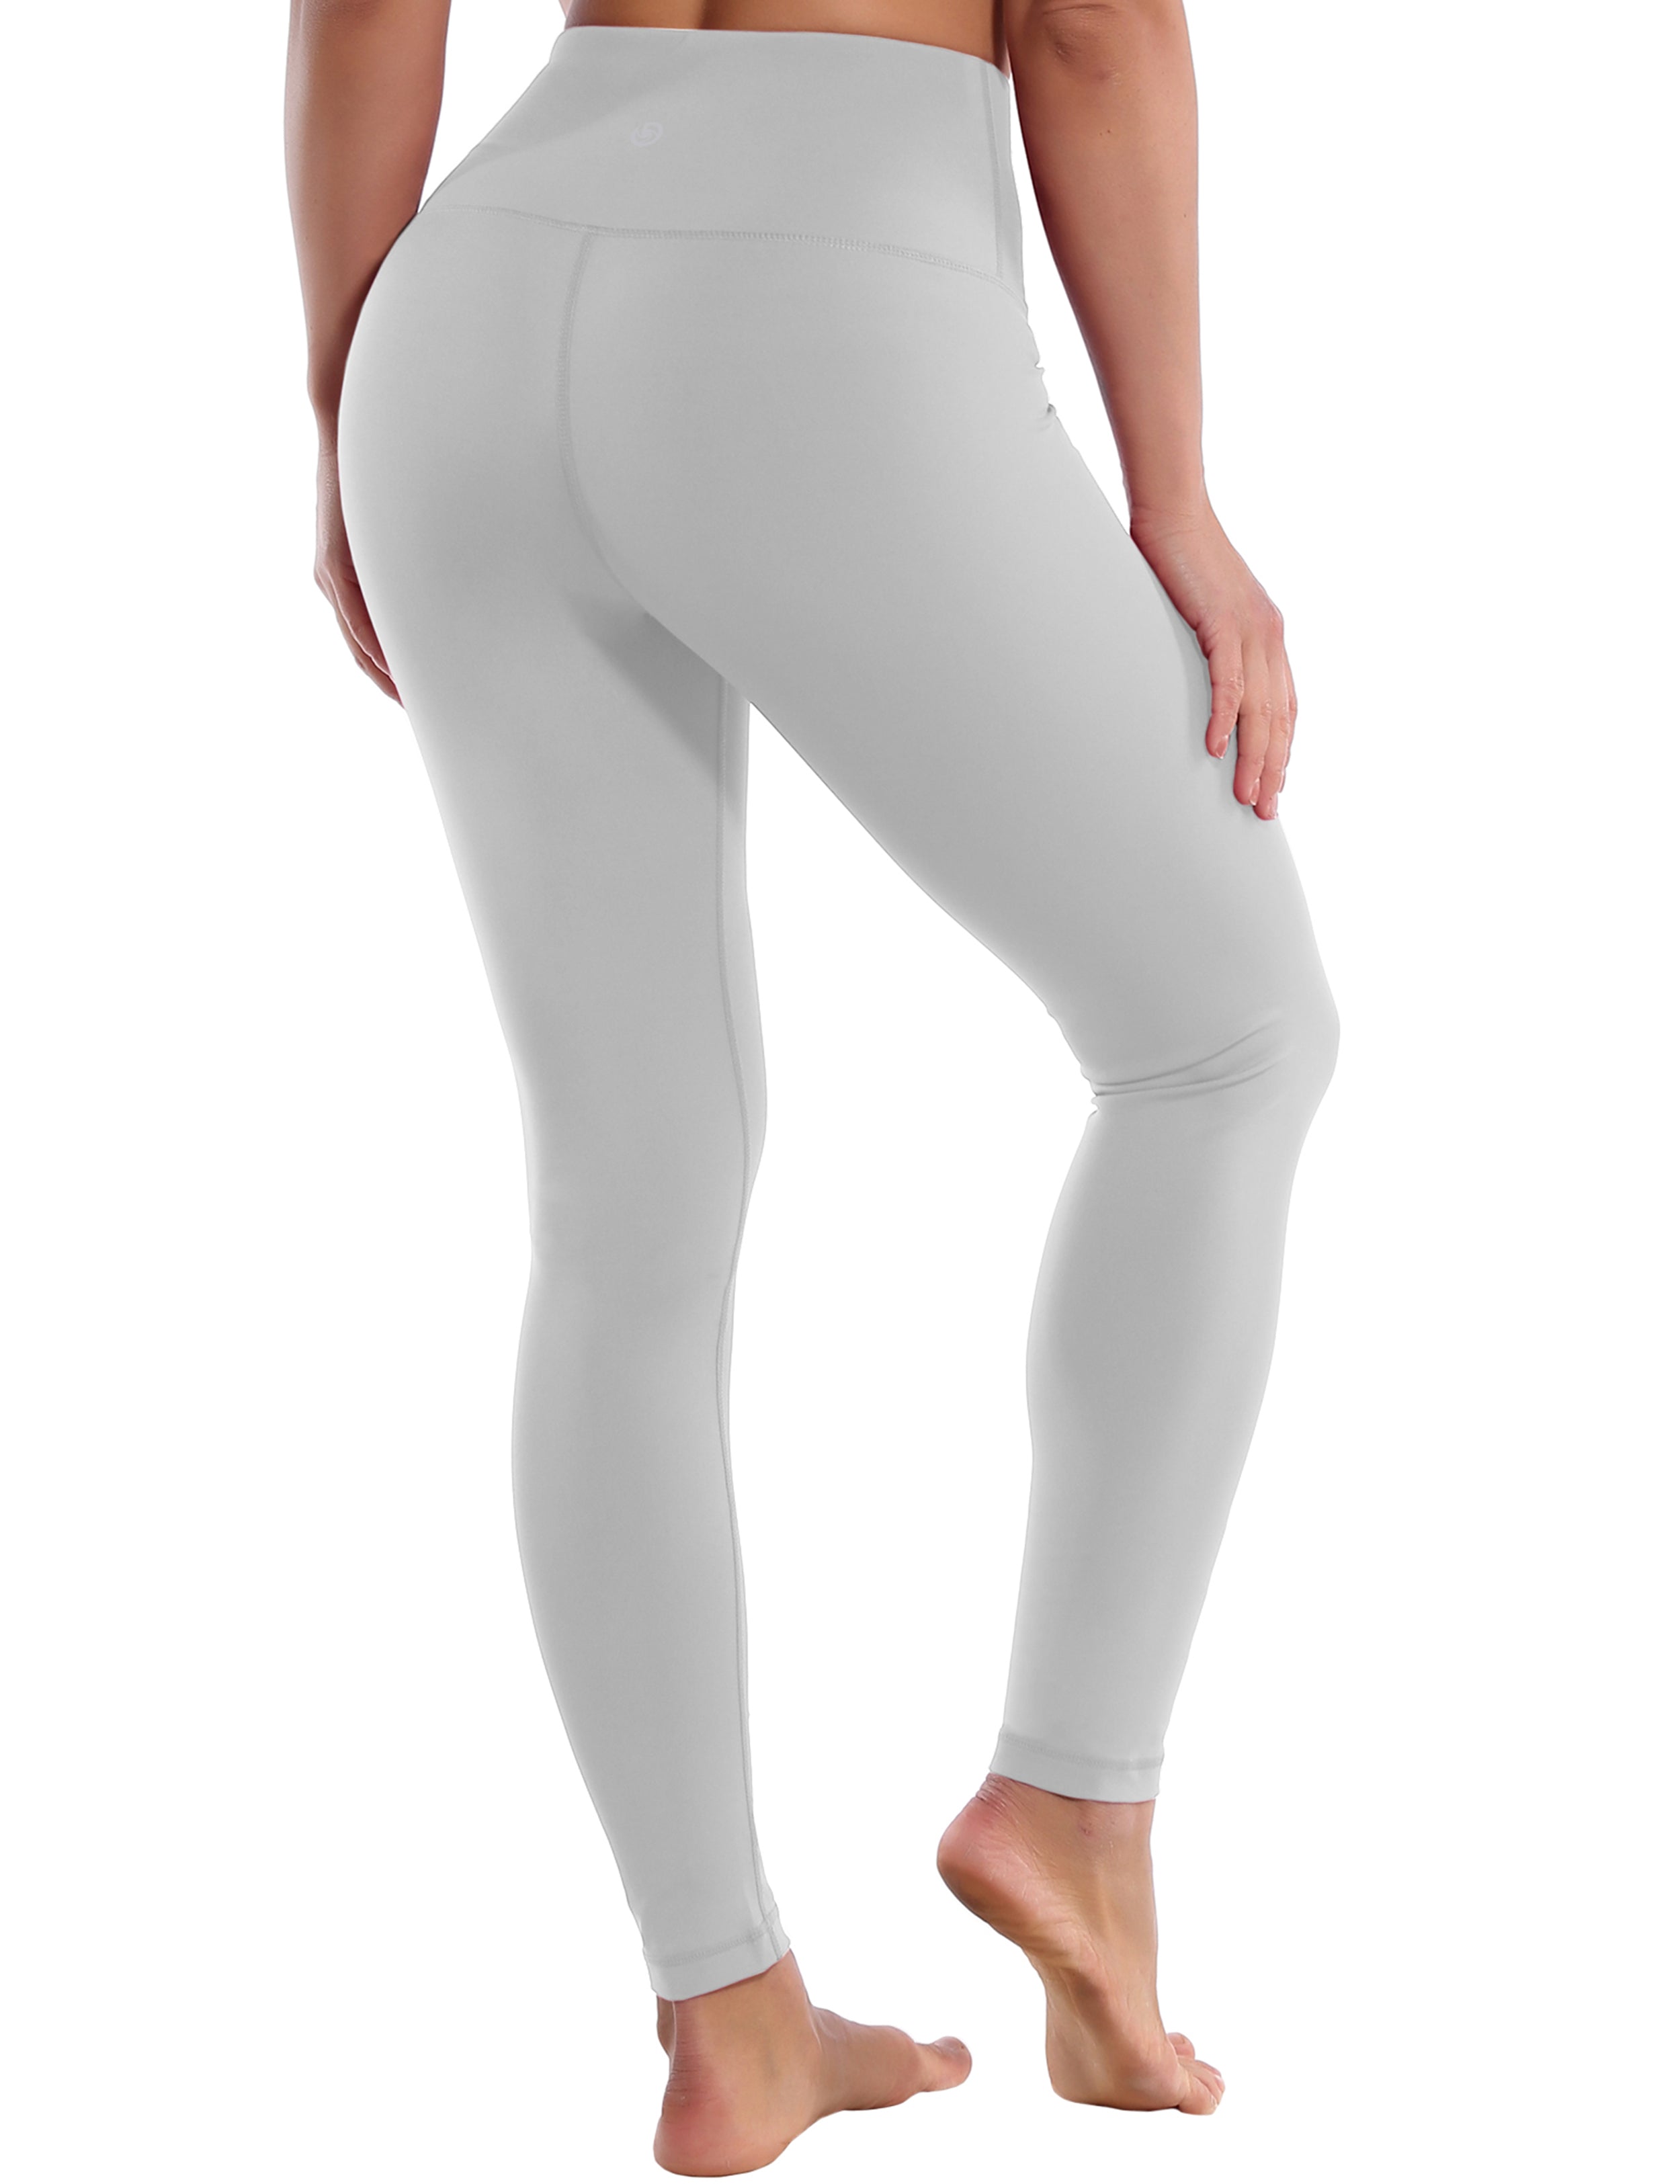 High Waist Golf Pants lightgray 75%Nylon/25%Spandex Fabric doesn't attract lint easily 4-way stretch No see-through Moisture-wicking Tummy control Inner pocket Four lengths